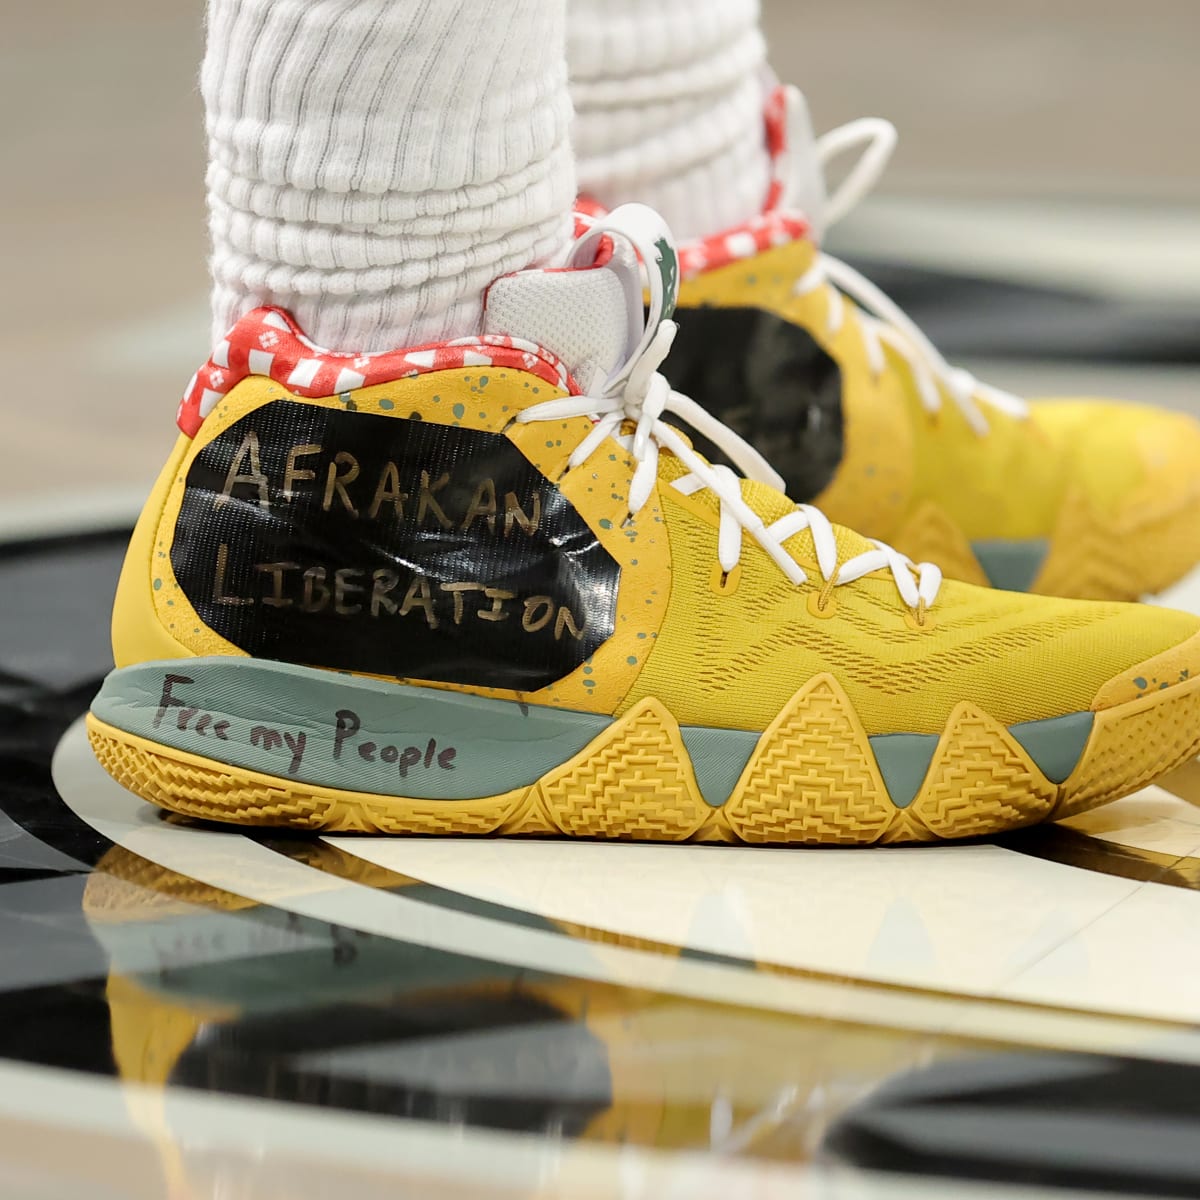 Nike's New SpongeBob x Kyrie Irving Collaboration Will Have You